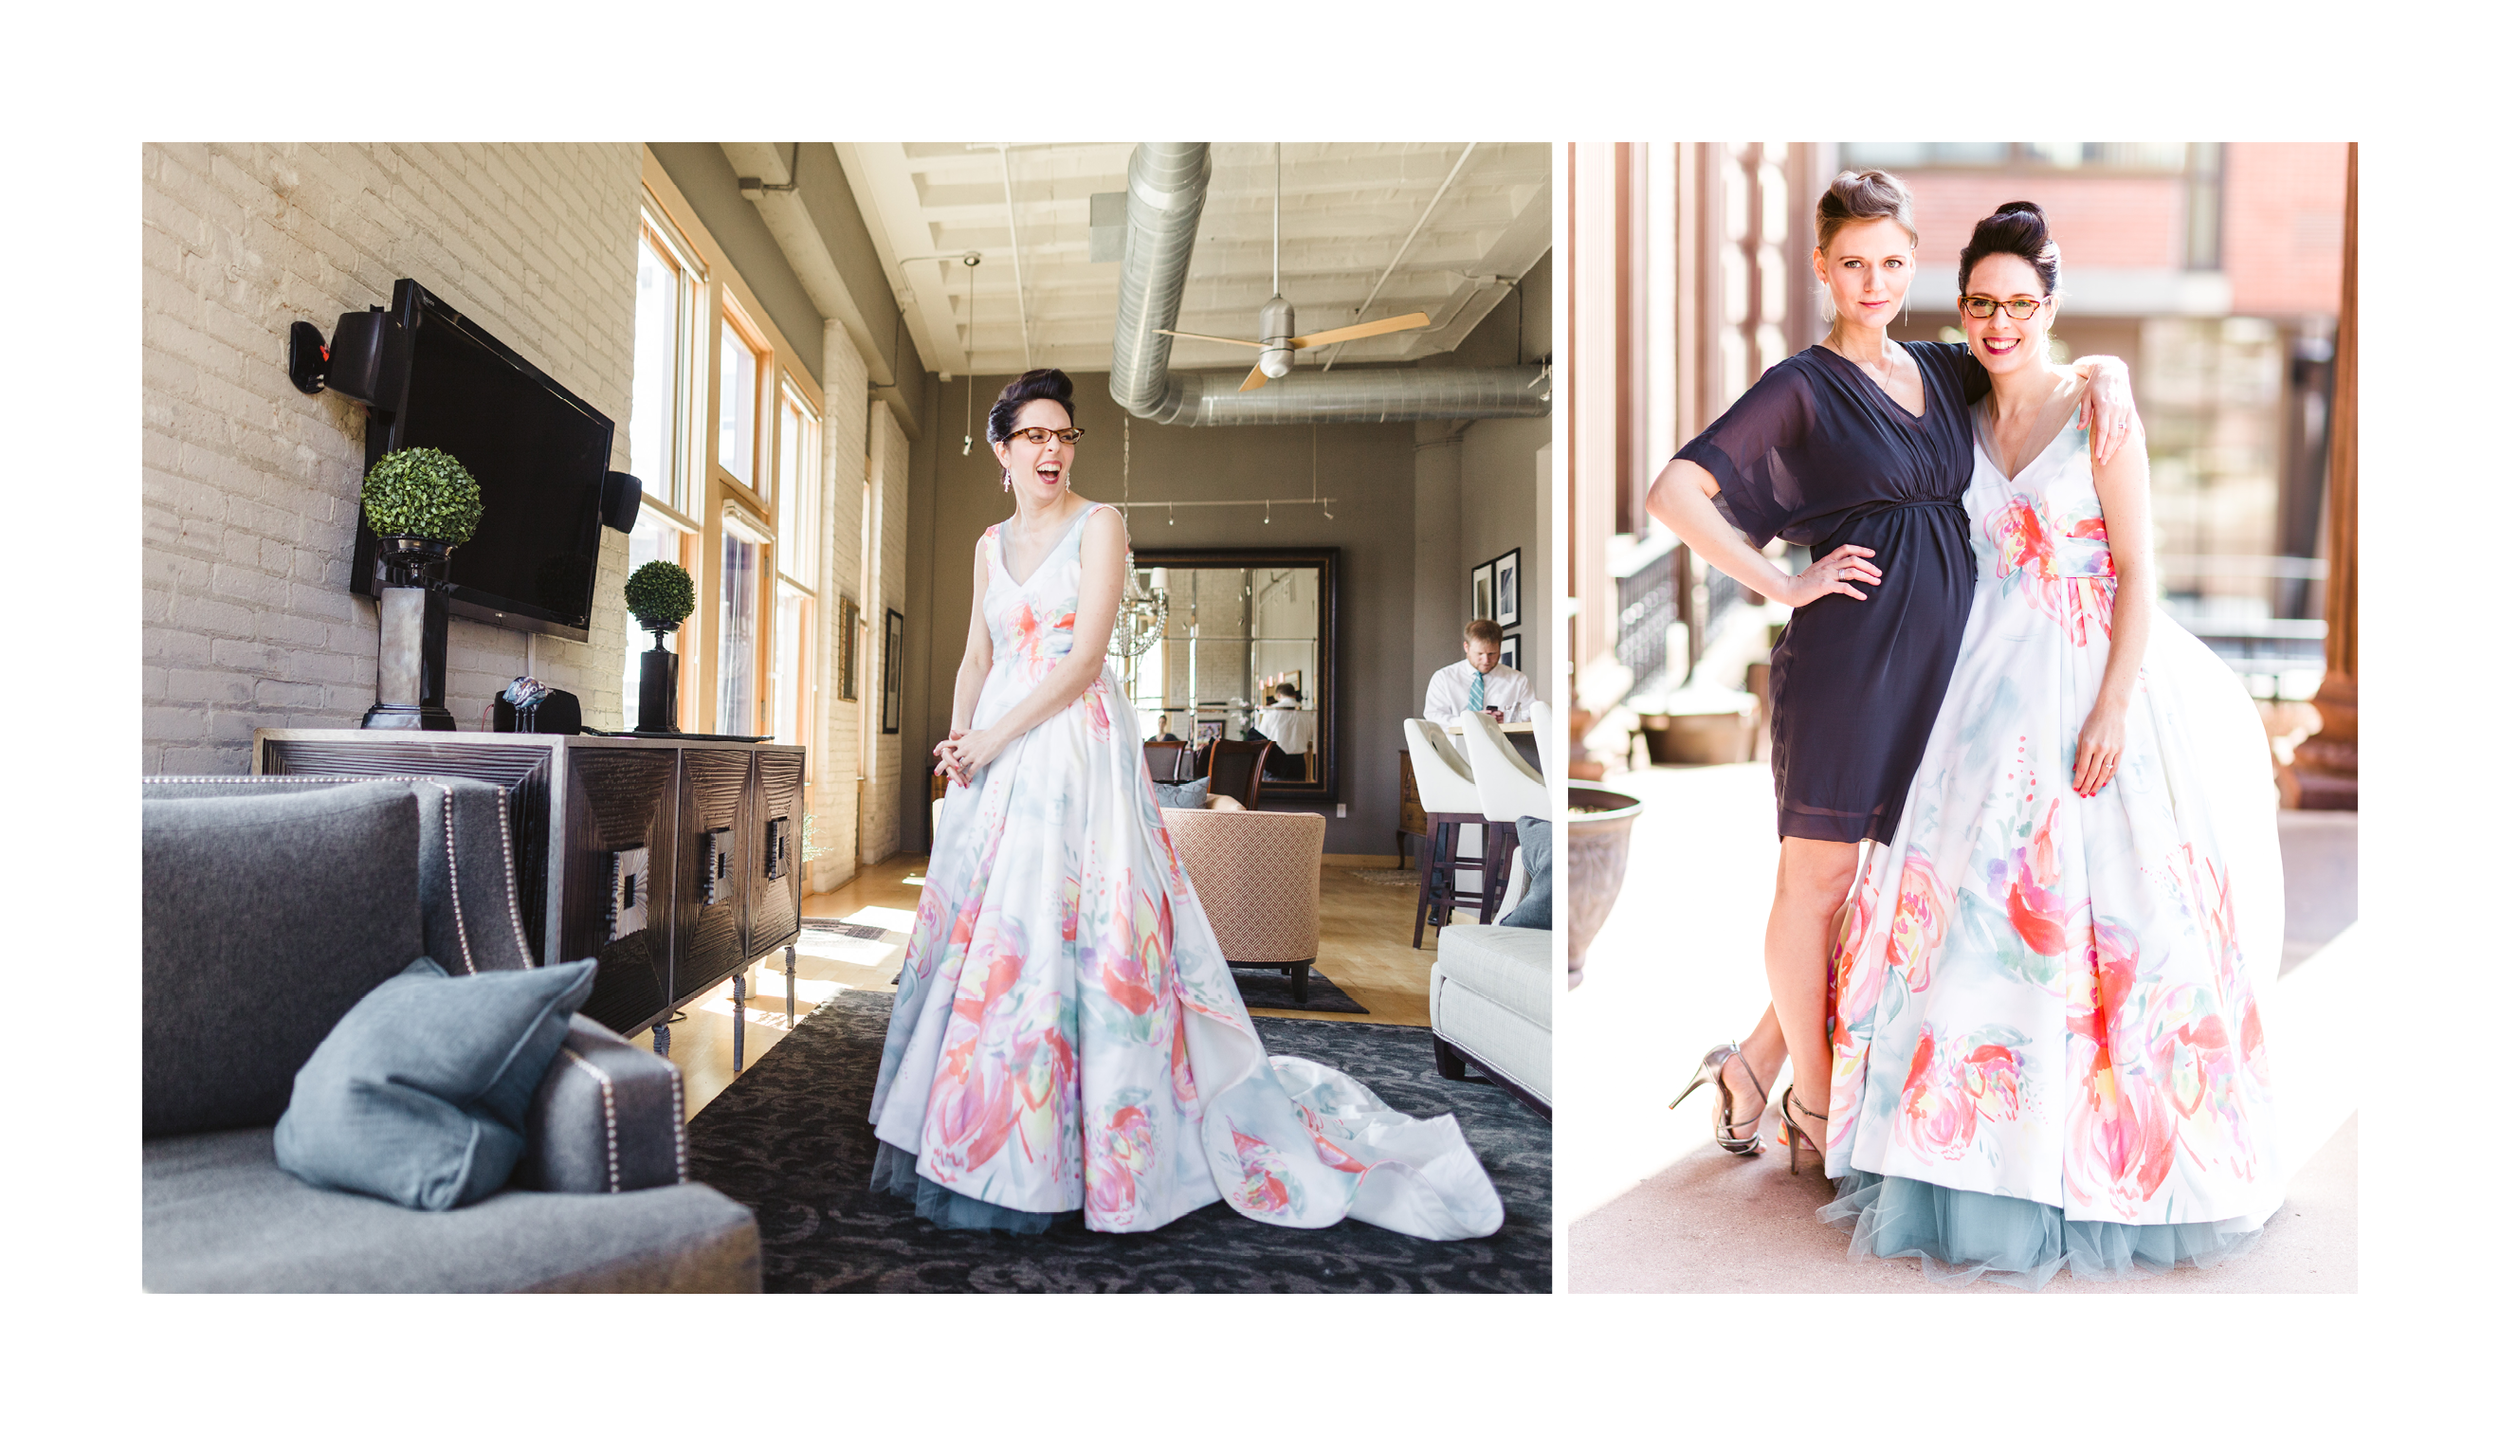  Images by  Valo Photography  | Custom fabric print design (watercolor original, digitized) by Schumann Studio | Custom Gown by  Mink Maids  